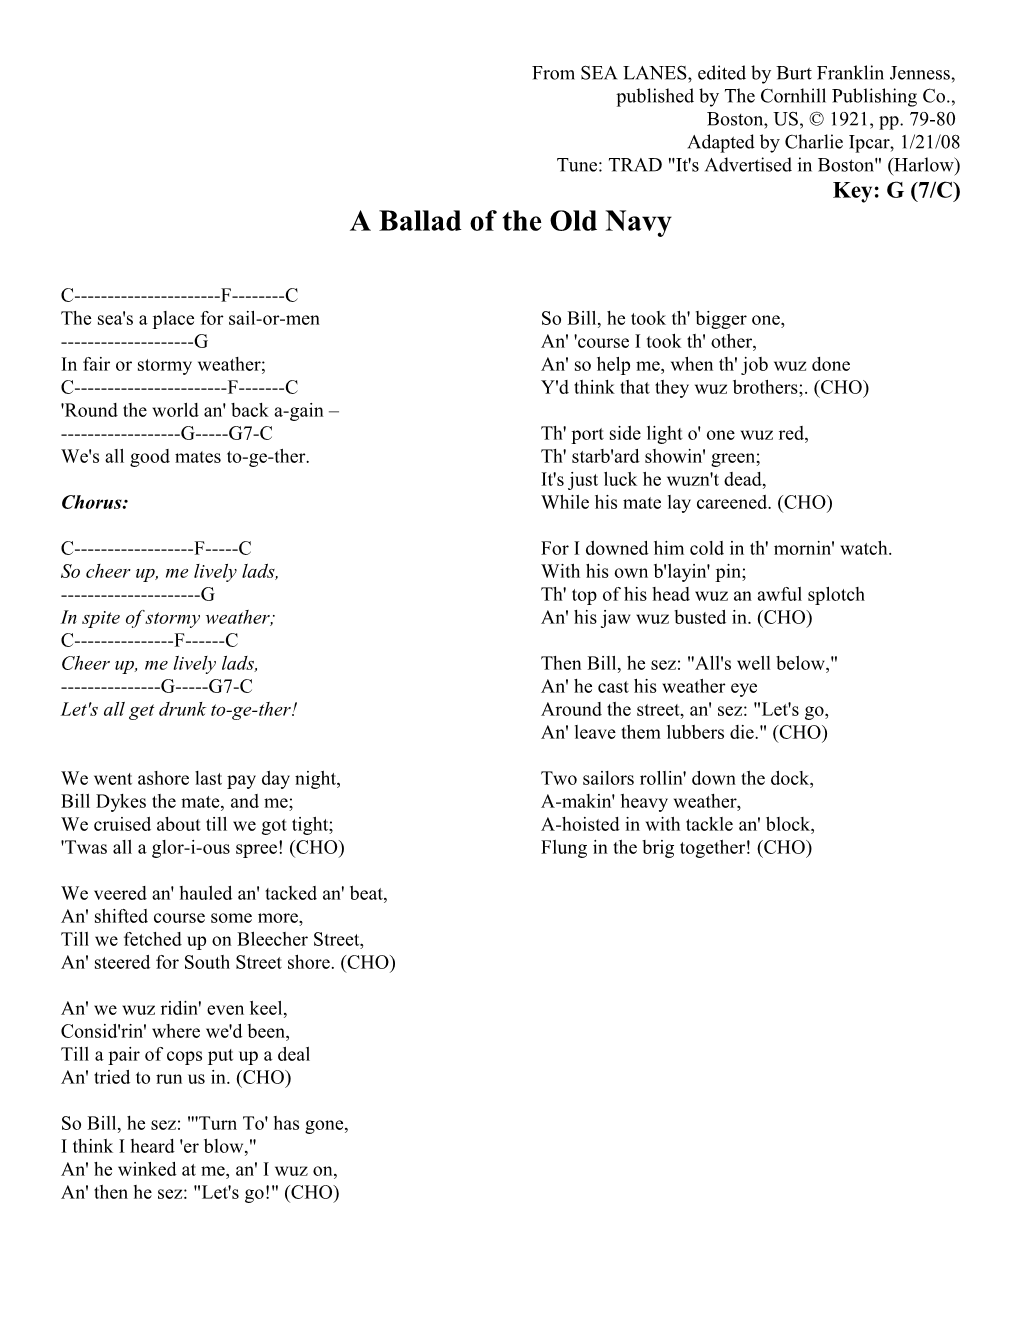 A Ballad of the Old Navy